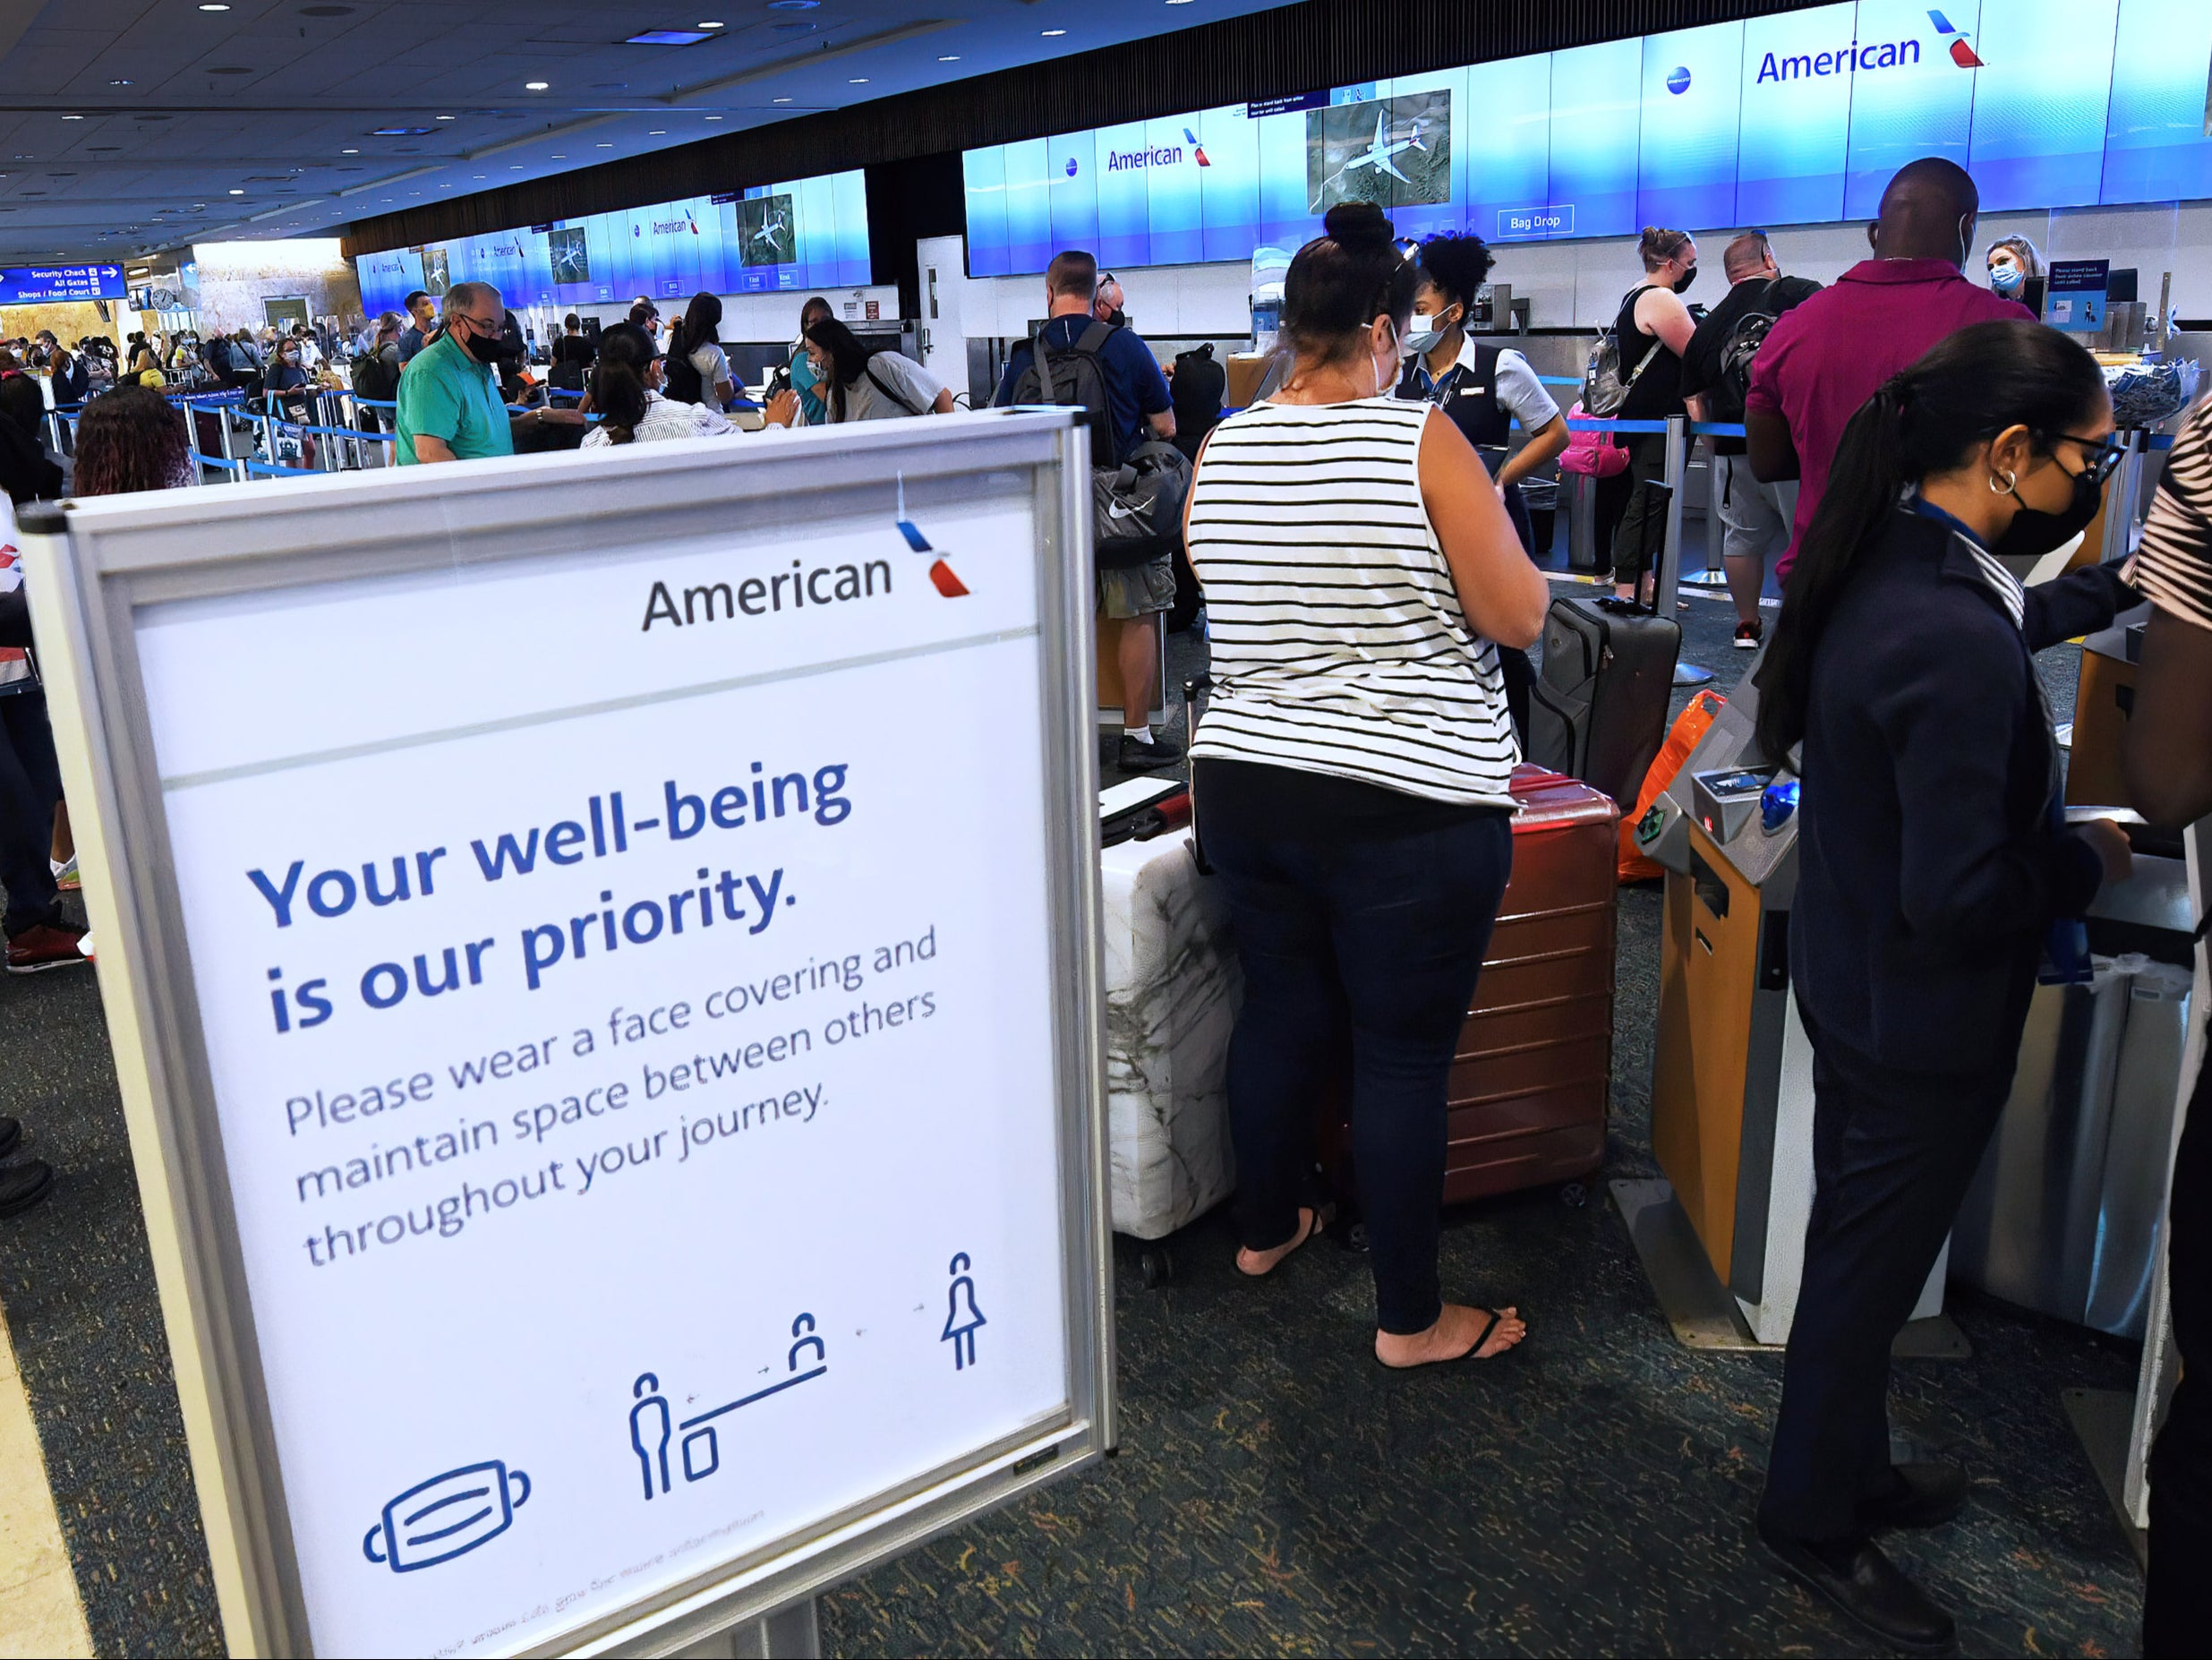 Passengers waiting in line for an American Airlines flight